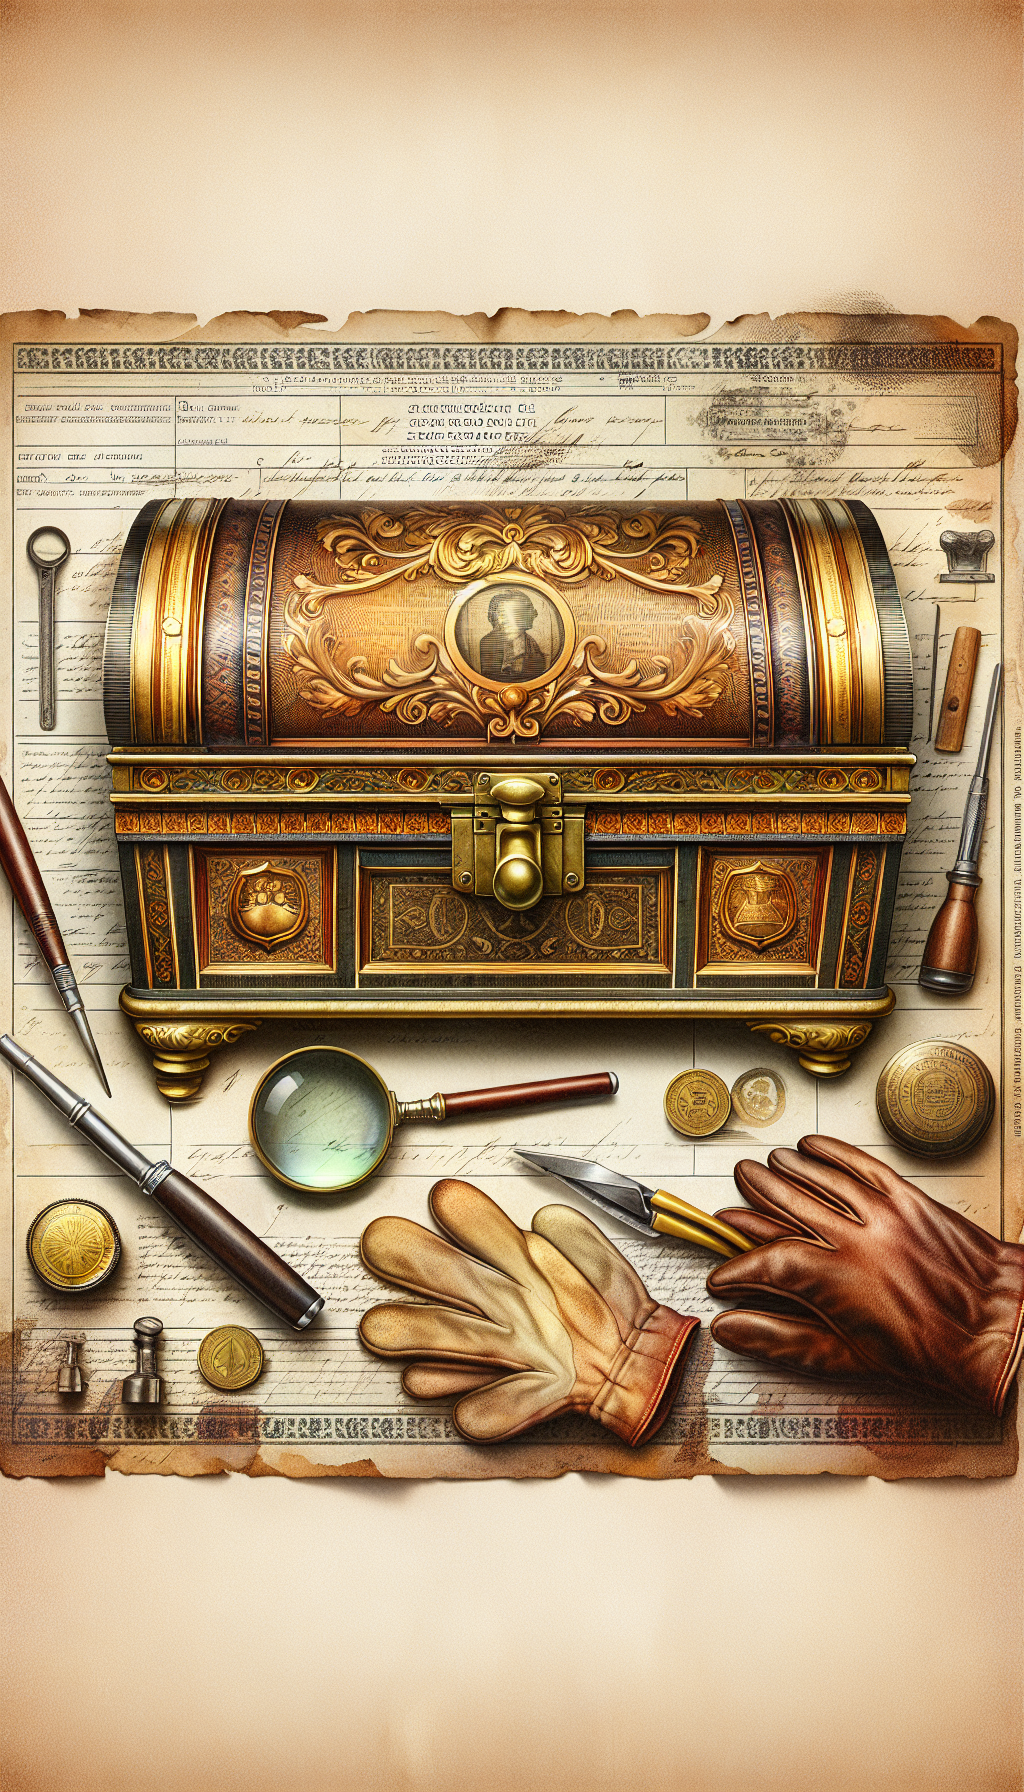 An illustrated cross-section of an antique pie safe, highlighting areas of preserved patina with lustrous, golden accents on the edges and corners against a backdrop of a faded appraisal document watermark. Various tools like magnifying glass, gloves, and an auctioneer's gavel subtly interspersed, suggesting the careful evaluation of the pie safe's authentic condition and its intrinsic historical value.